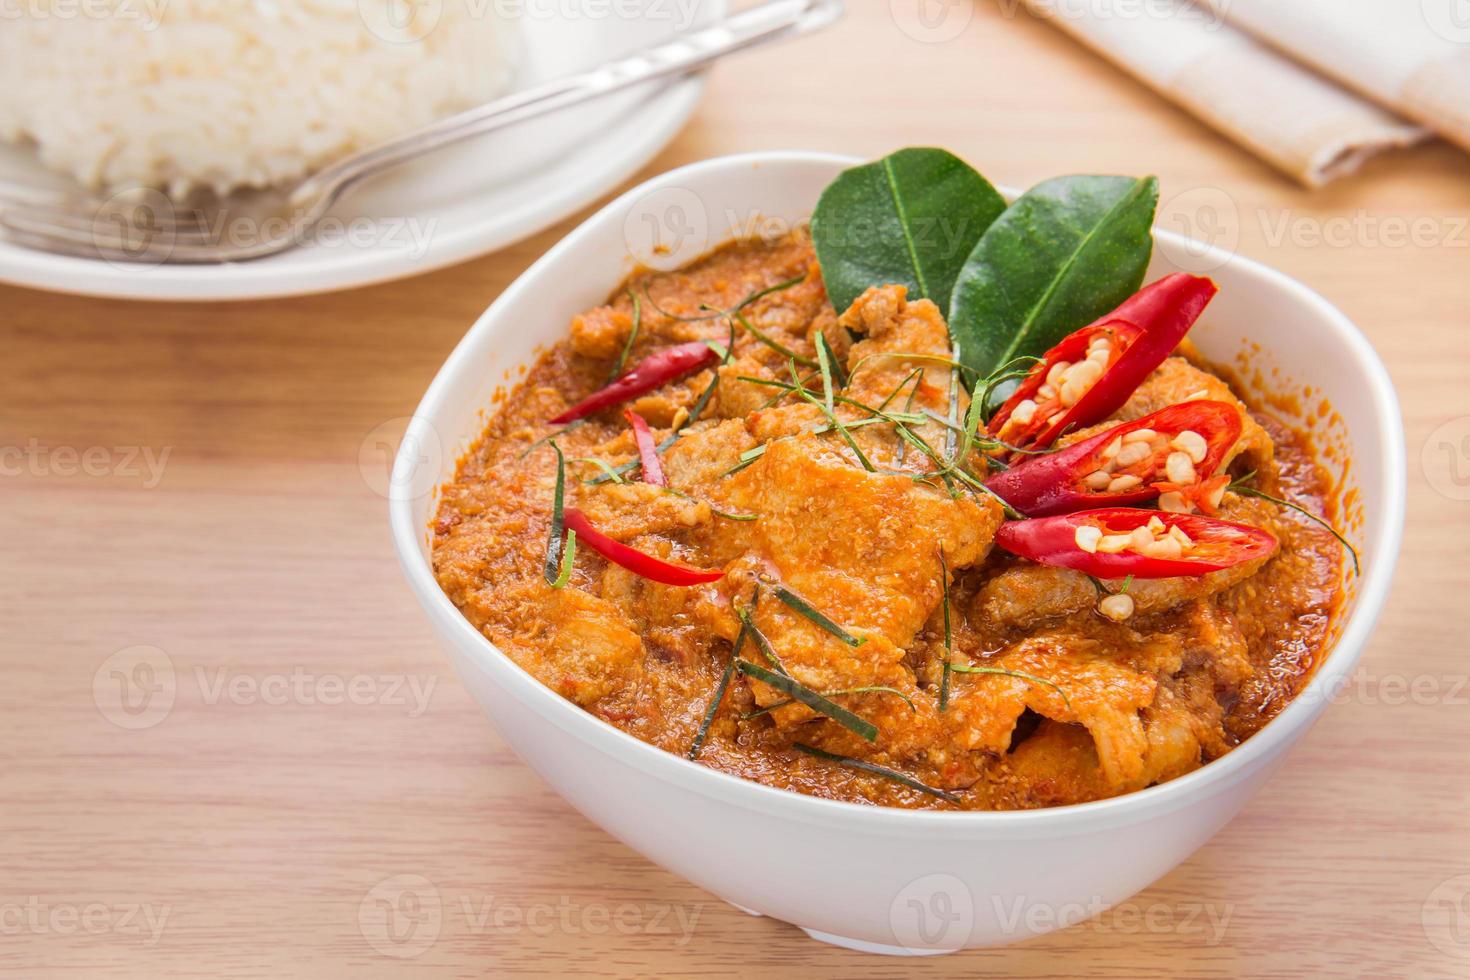 Red curry with pork and rice (Panaeng), Thai food photo